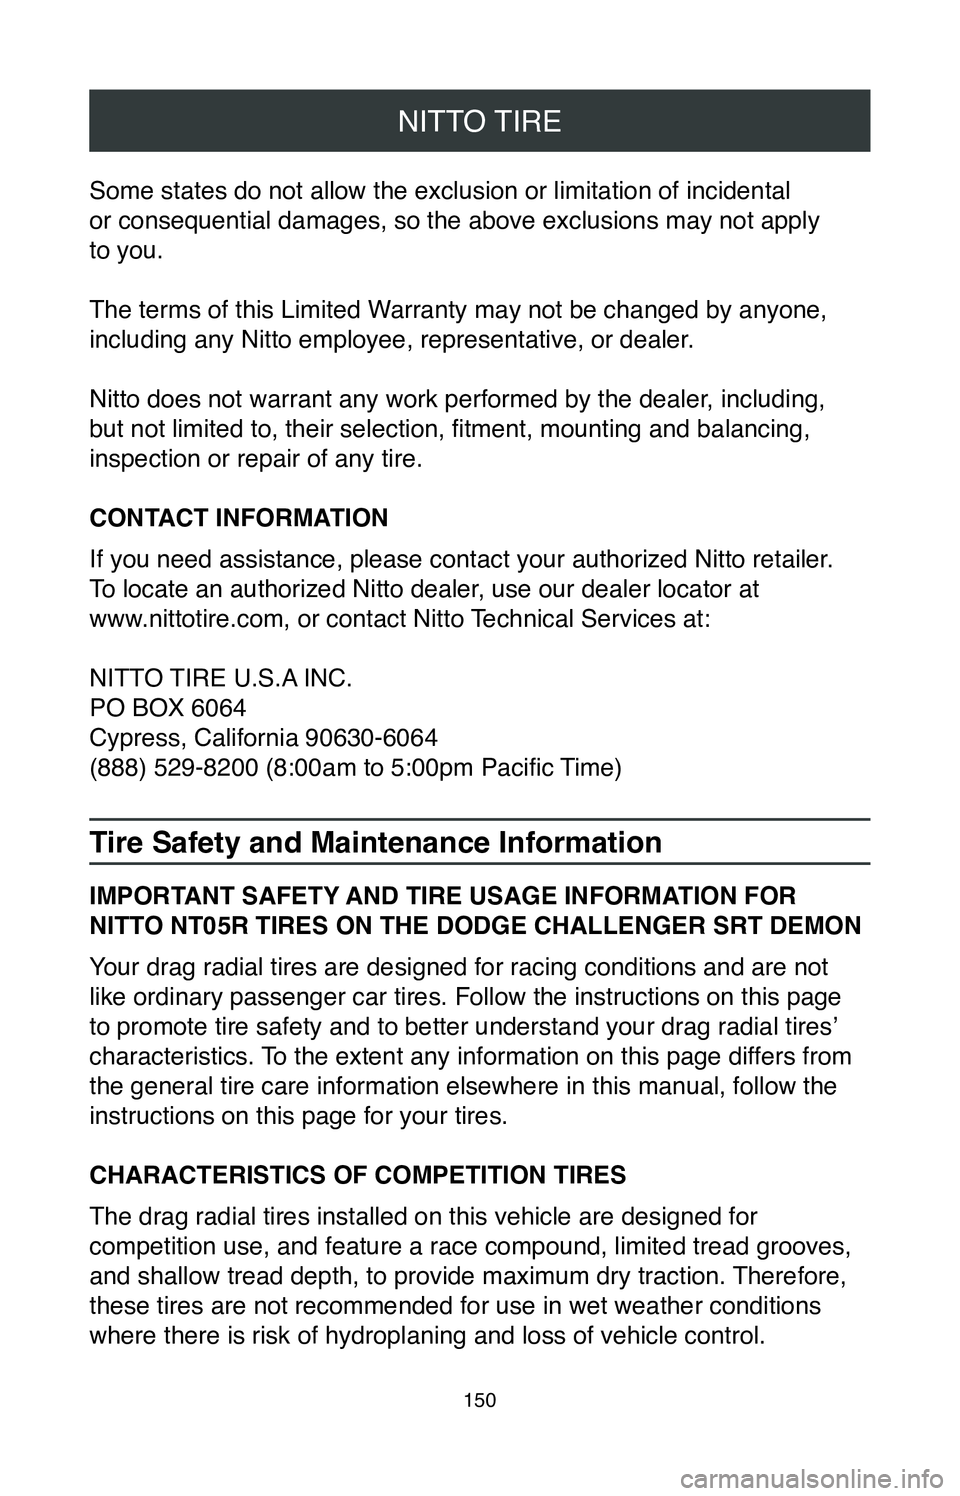 TOYOTA C-HR 2020  Warranties & Maintenance Guides (in English) NITTO TIRE
150
Some states do not allow the exclusion or limitation of incidental  
or consequential damages, so the above exclusions may not apply  
to you.
The terms of this Limited Warranty may not